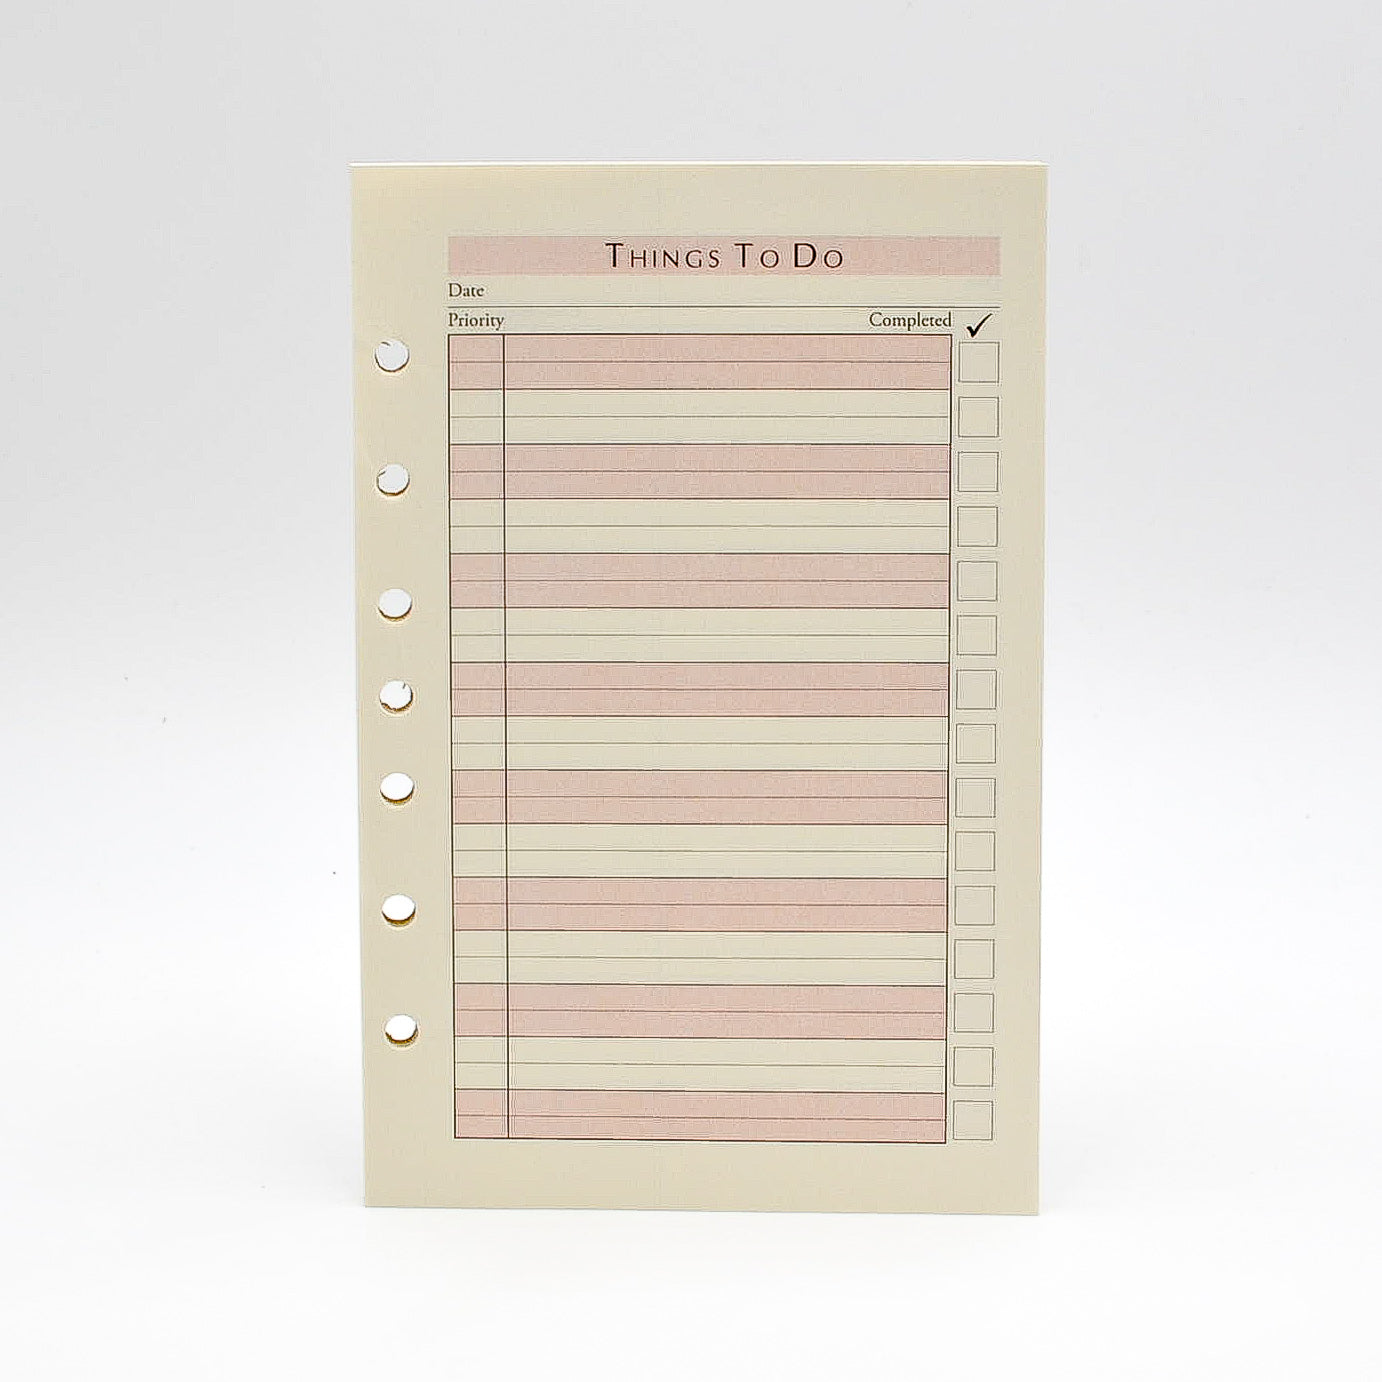 Item PCTD82-13 To-do Sheets  White or Ivory paper. Size 8-1/2"X 5-1/2" 3-ring 13 To-do Sheets  3-Ring Compatible with: MP58P3, PD823I, MW58P3, MA58P3-13  7-Ring Compatible with: MP58P7, PD827I, MW58P7, MA58P7-13  Made in the USA!